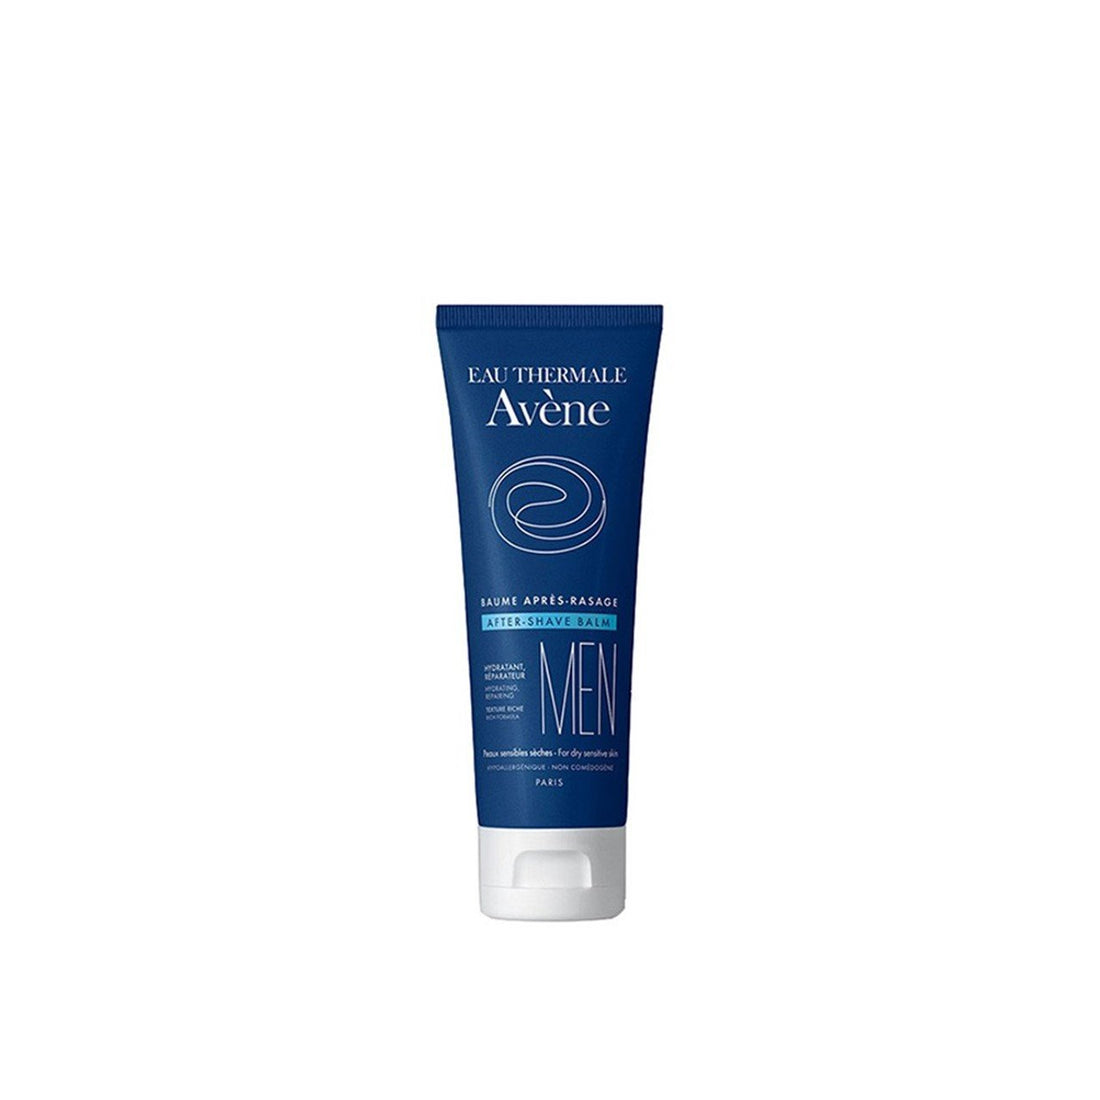 Avène Homme After Shave Balm 75ml